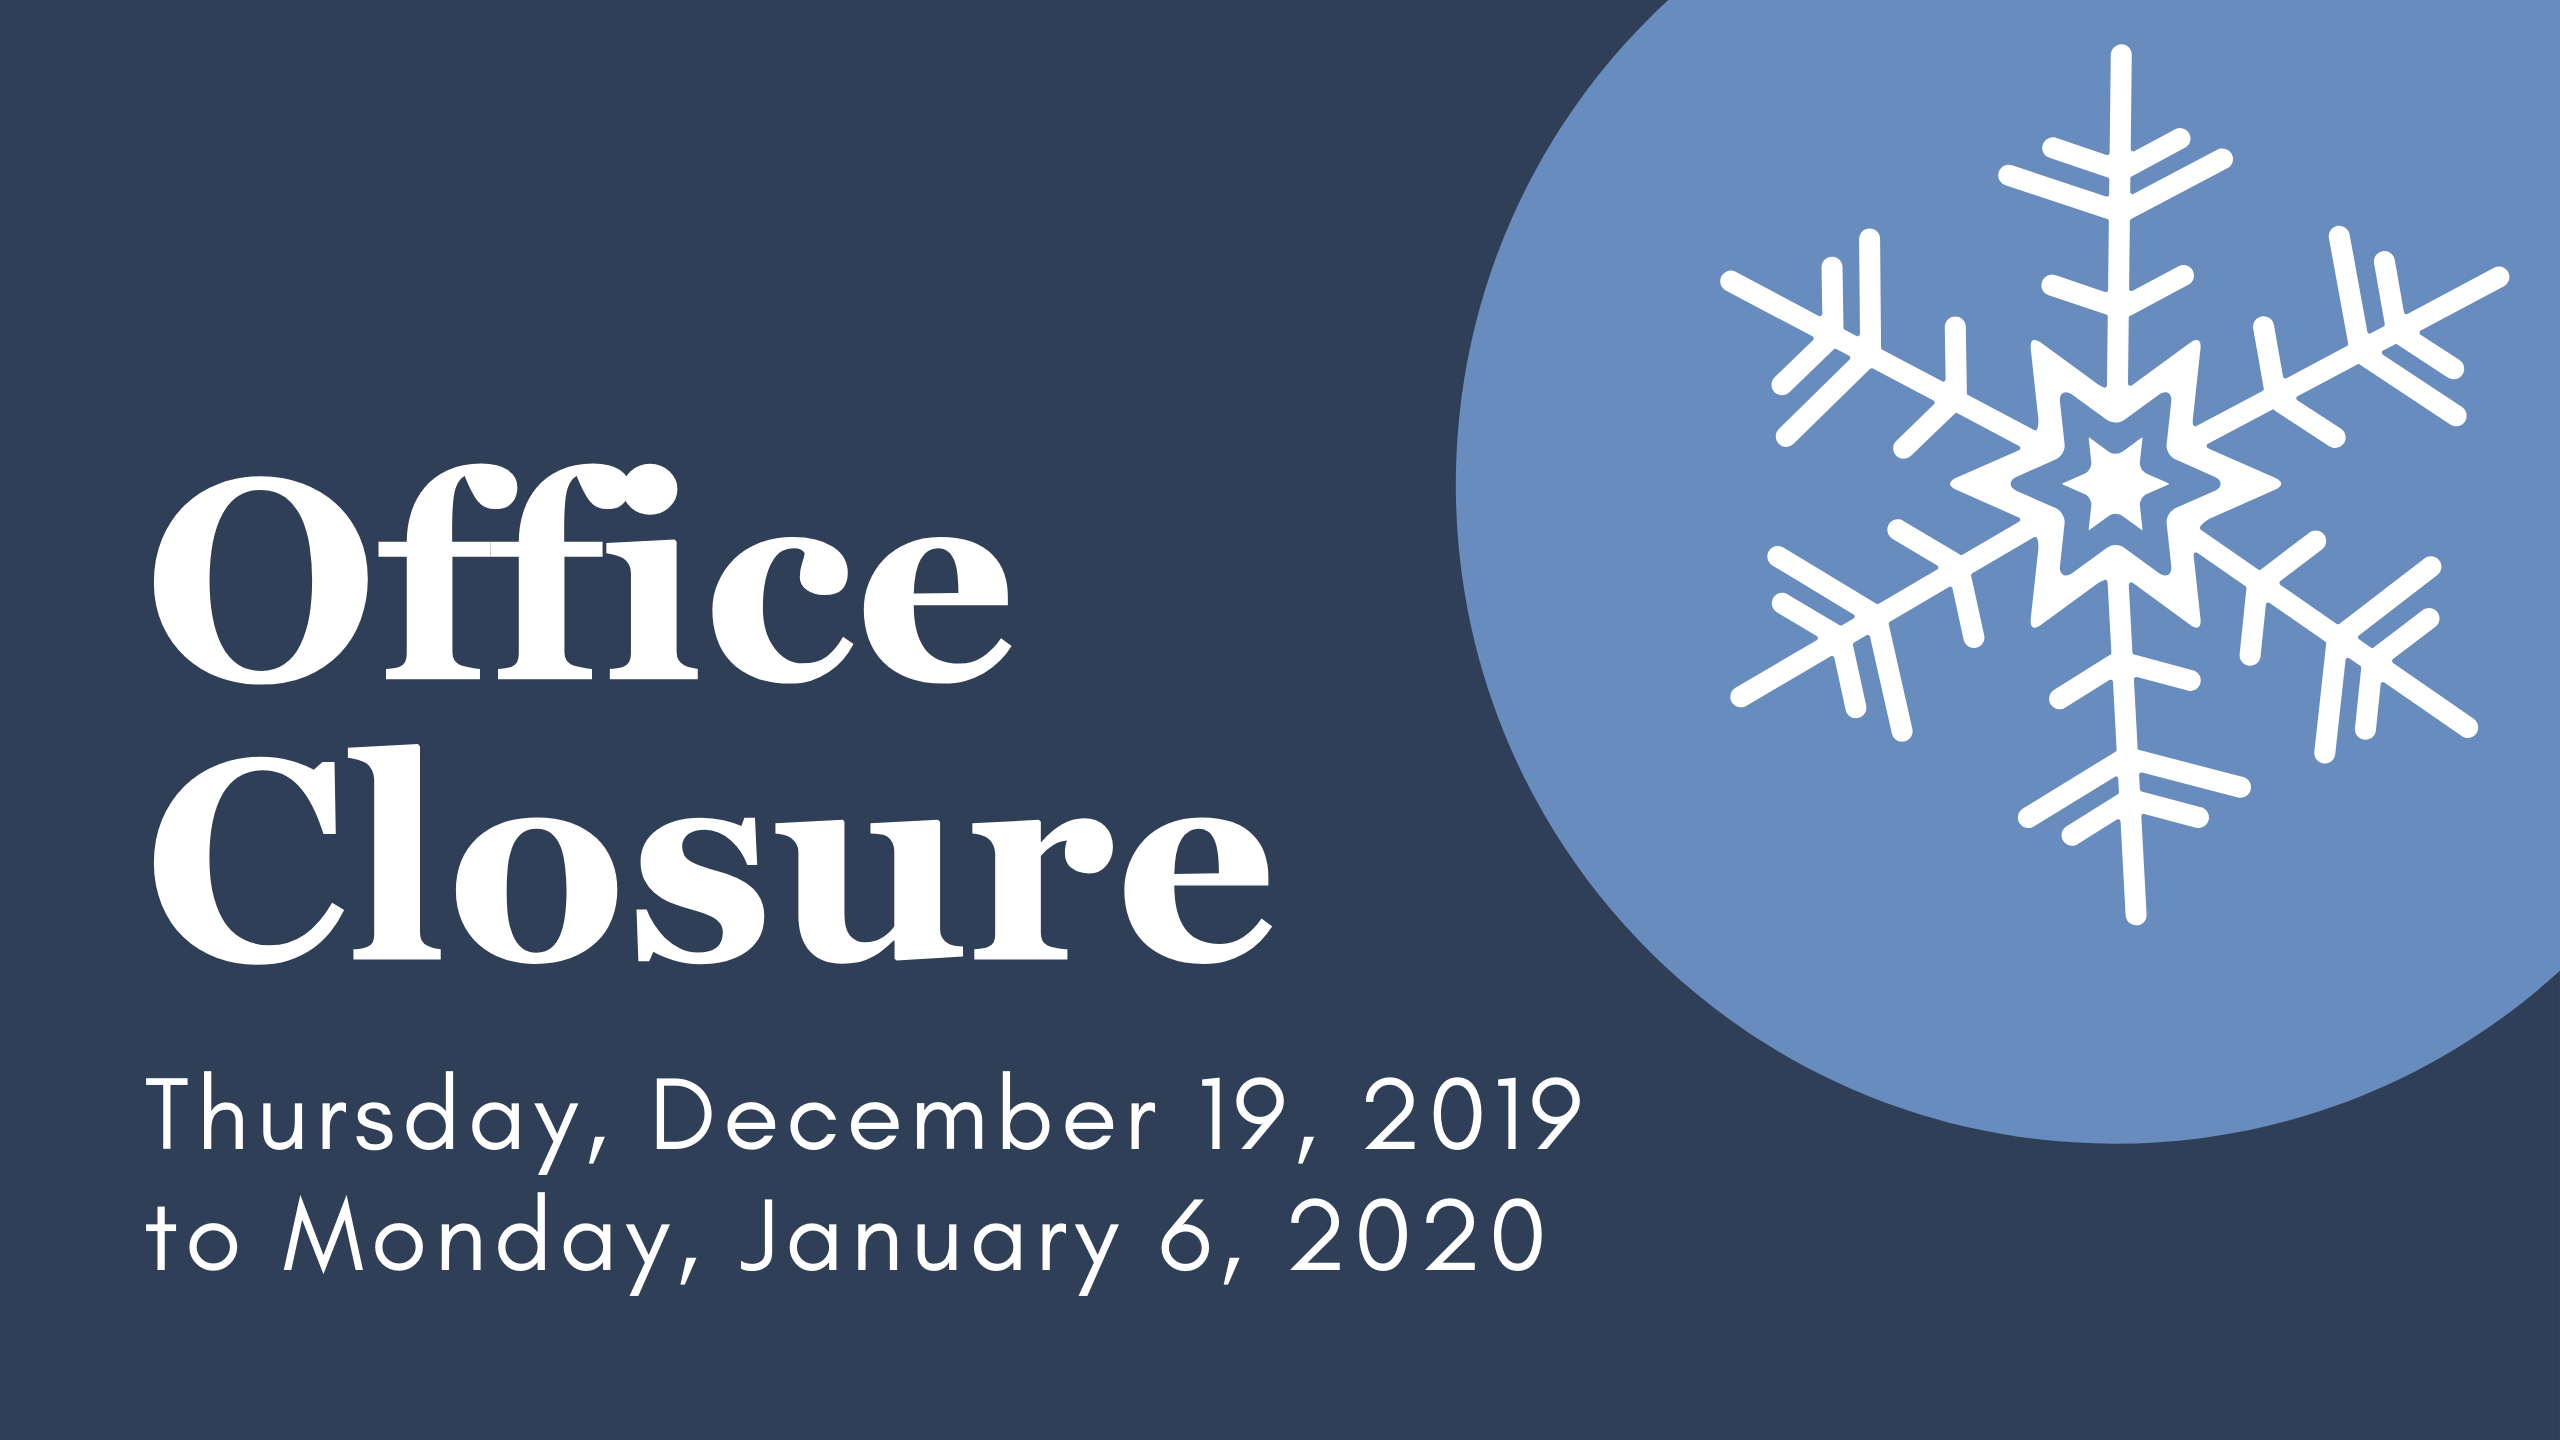 Navy and pale blue graphic with a snowflake. Text says "Office closure. Thursday, December 19, 2019 to Monday, January 6, 2020."